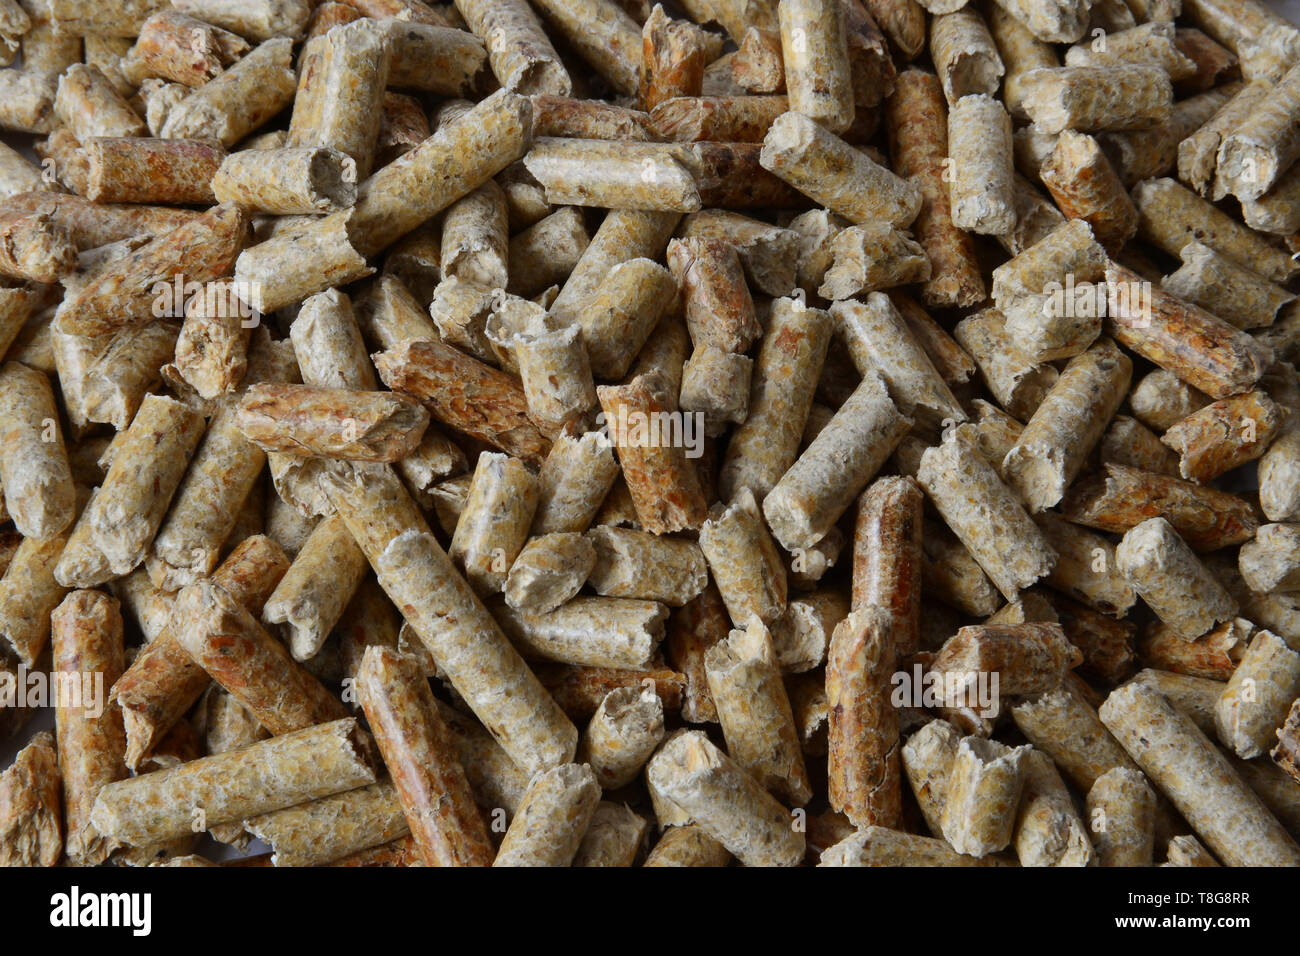 Wood pellets for the house fire. Germany Stock Photo